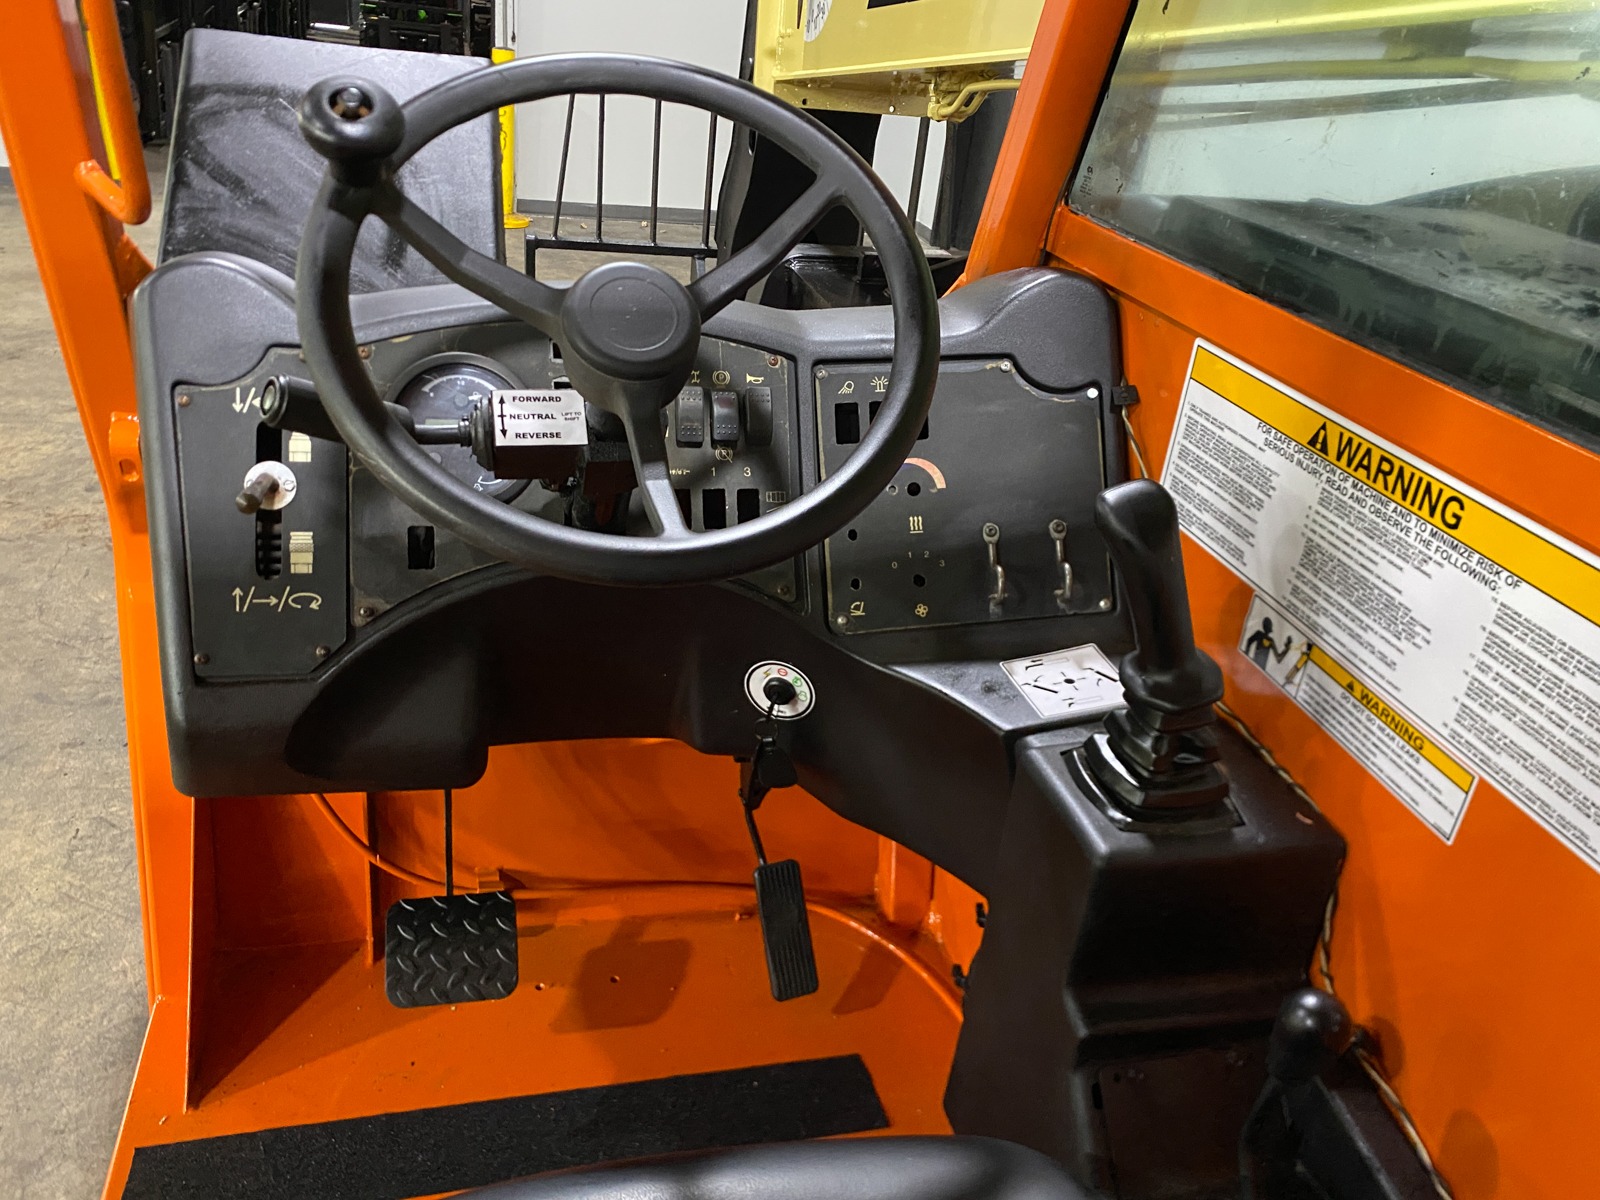 Used 2014 JLG G6-42A  | Cary, IL